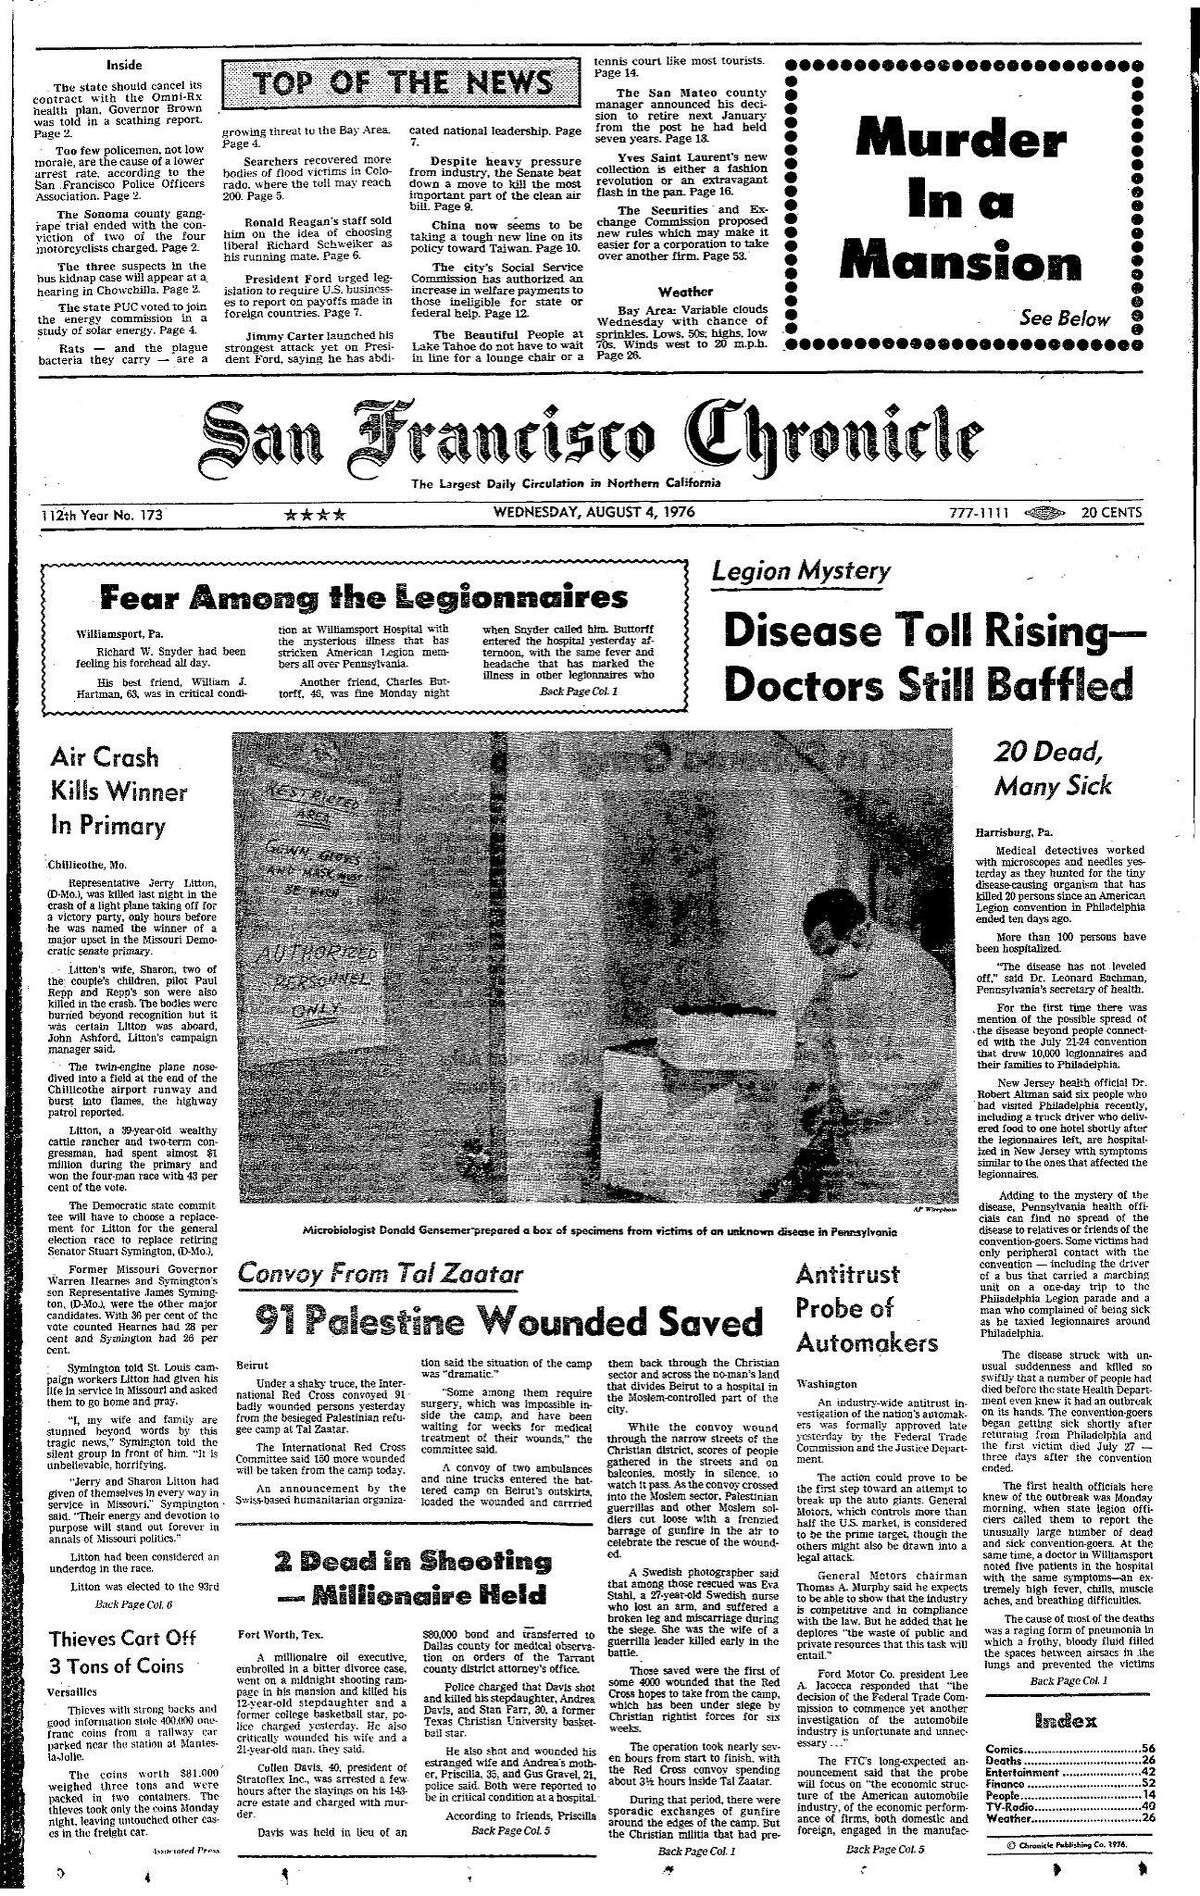 Historic Chronicle Front Page August 04, 1976 Legionaires Disease outbreak in Pennsylvania hotel Chron365, Chroncover